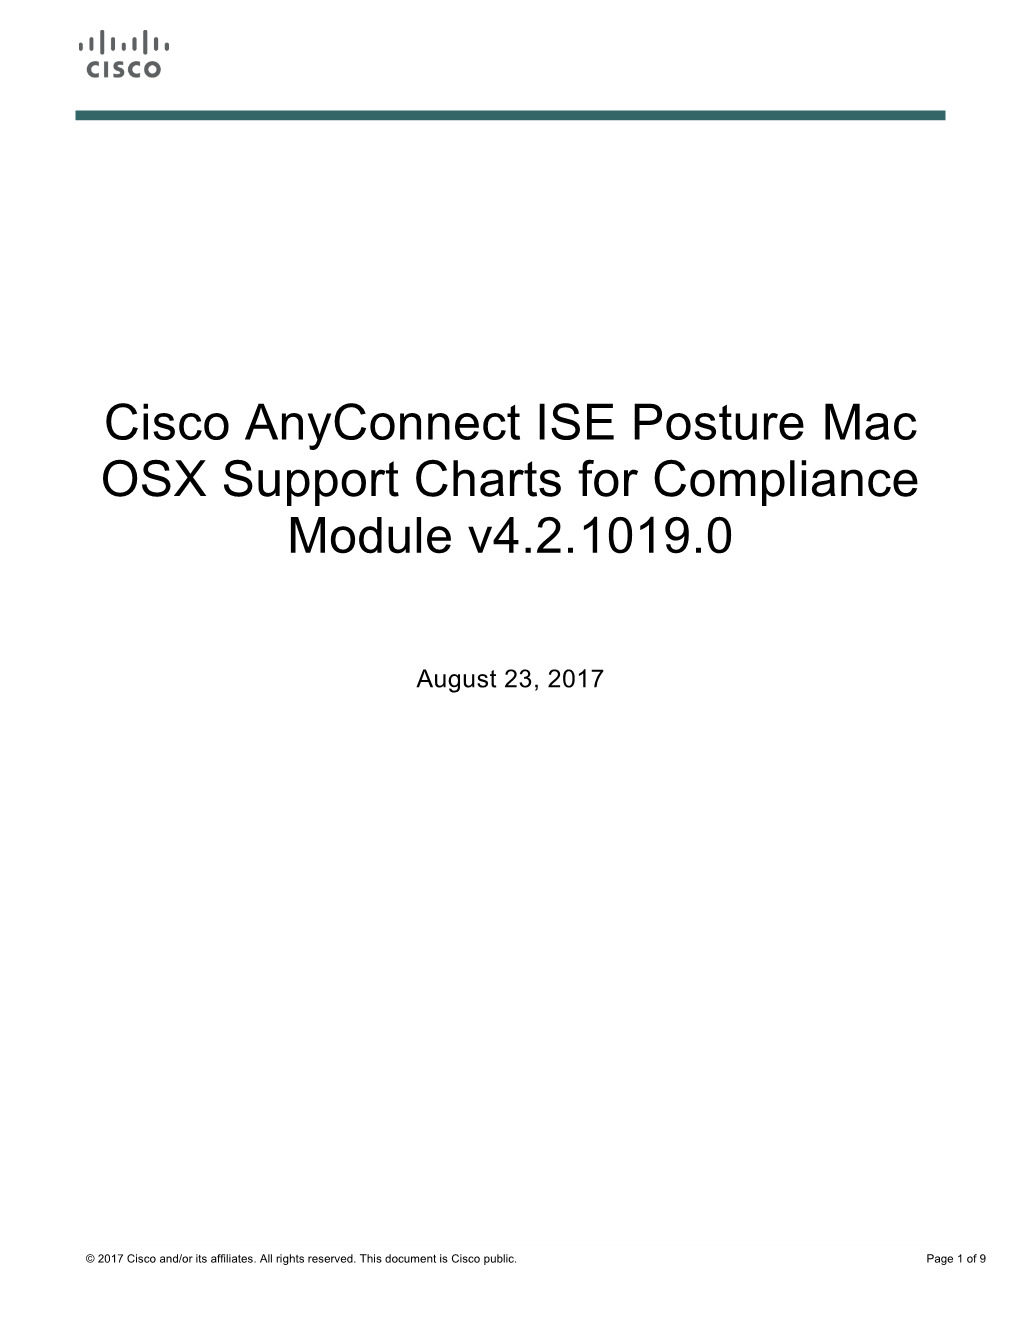 Cisco Anyconnect ISE Posture Mac OSX Support Charts for Compliance Module V4.2.1019.0